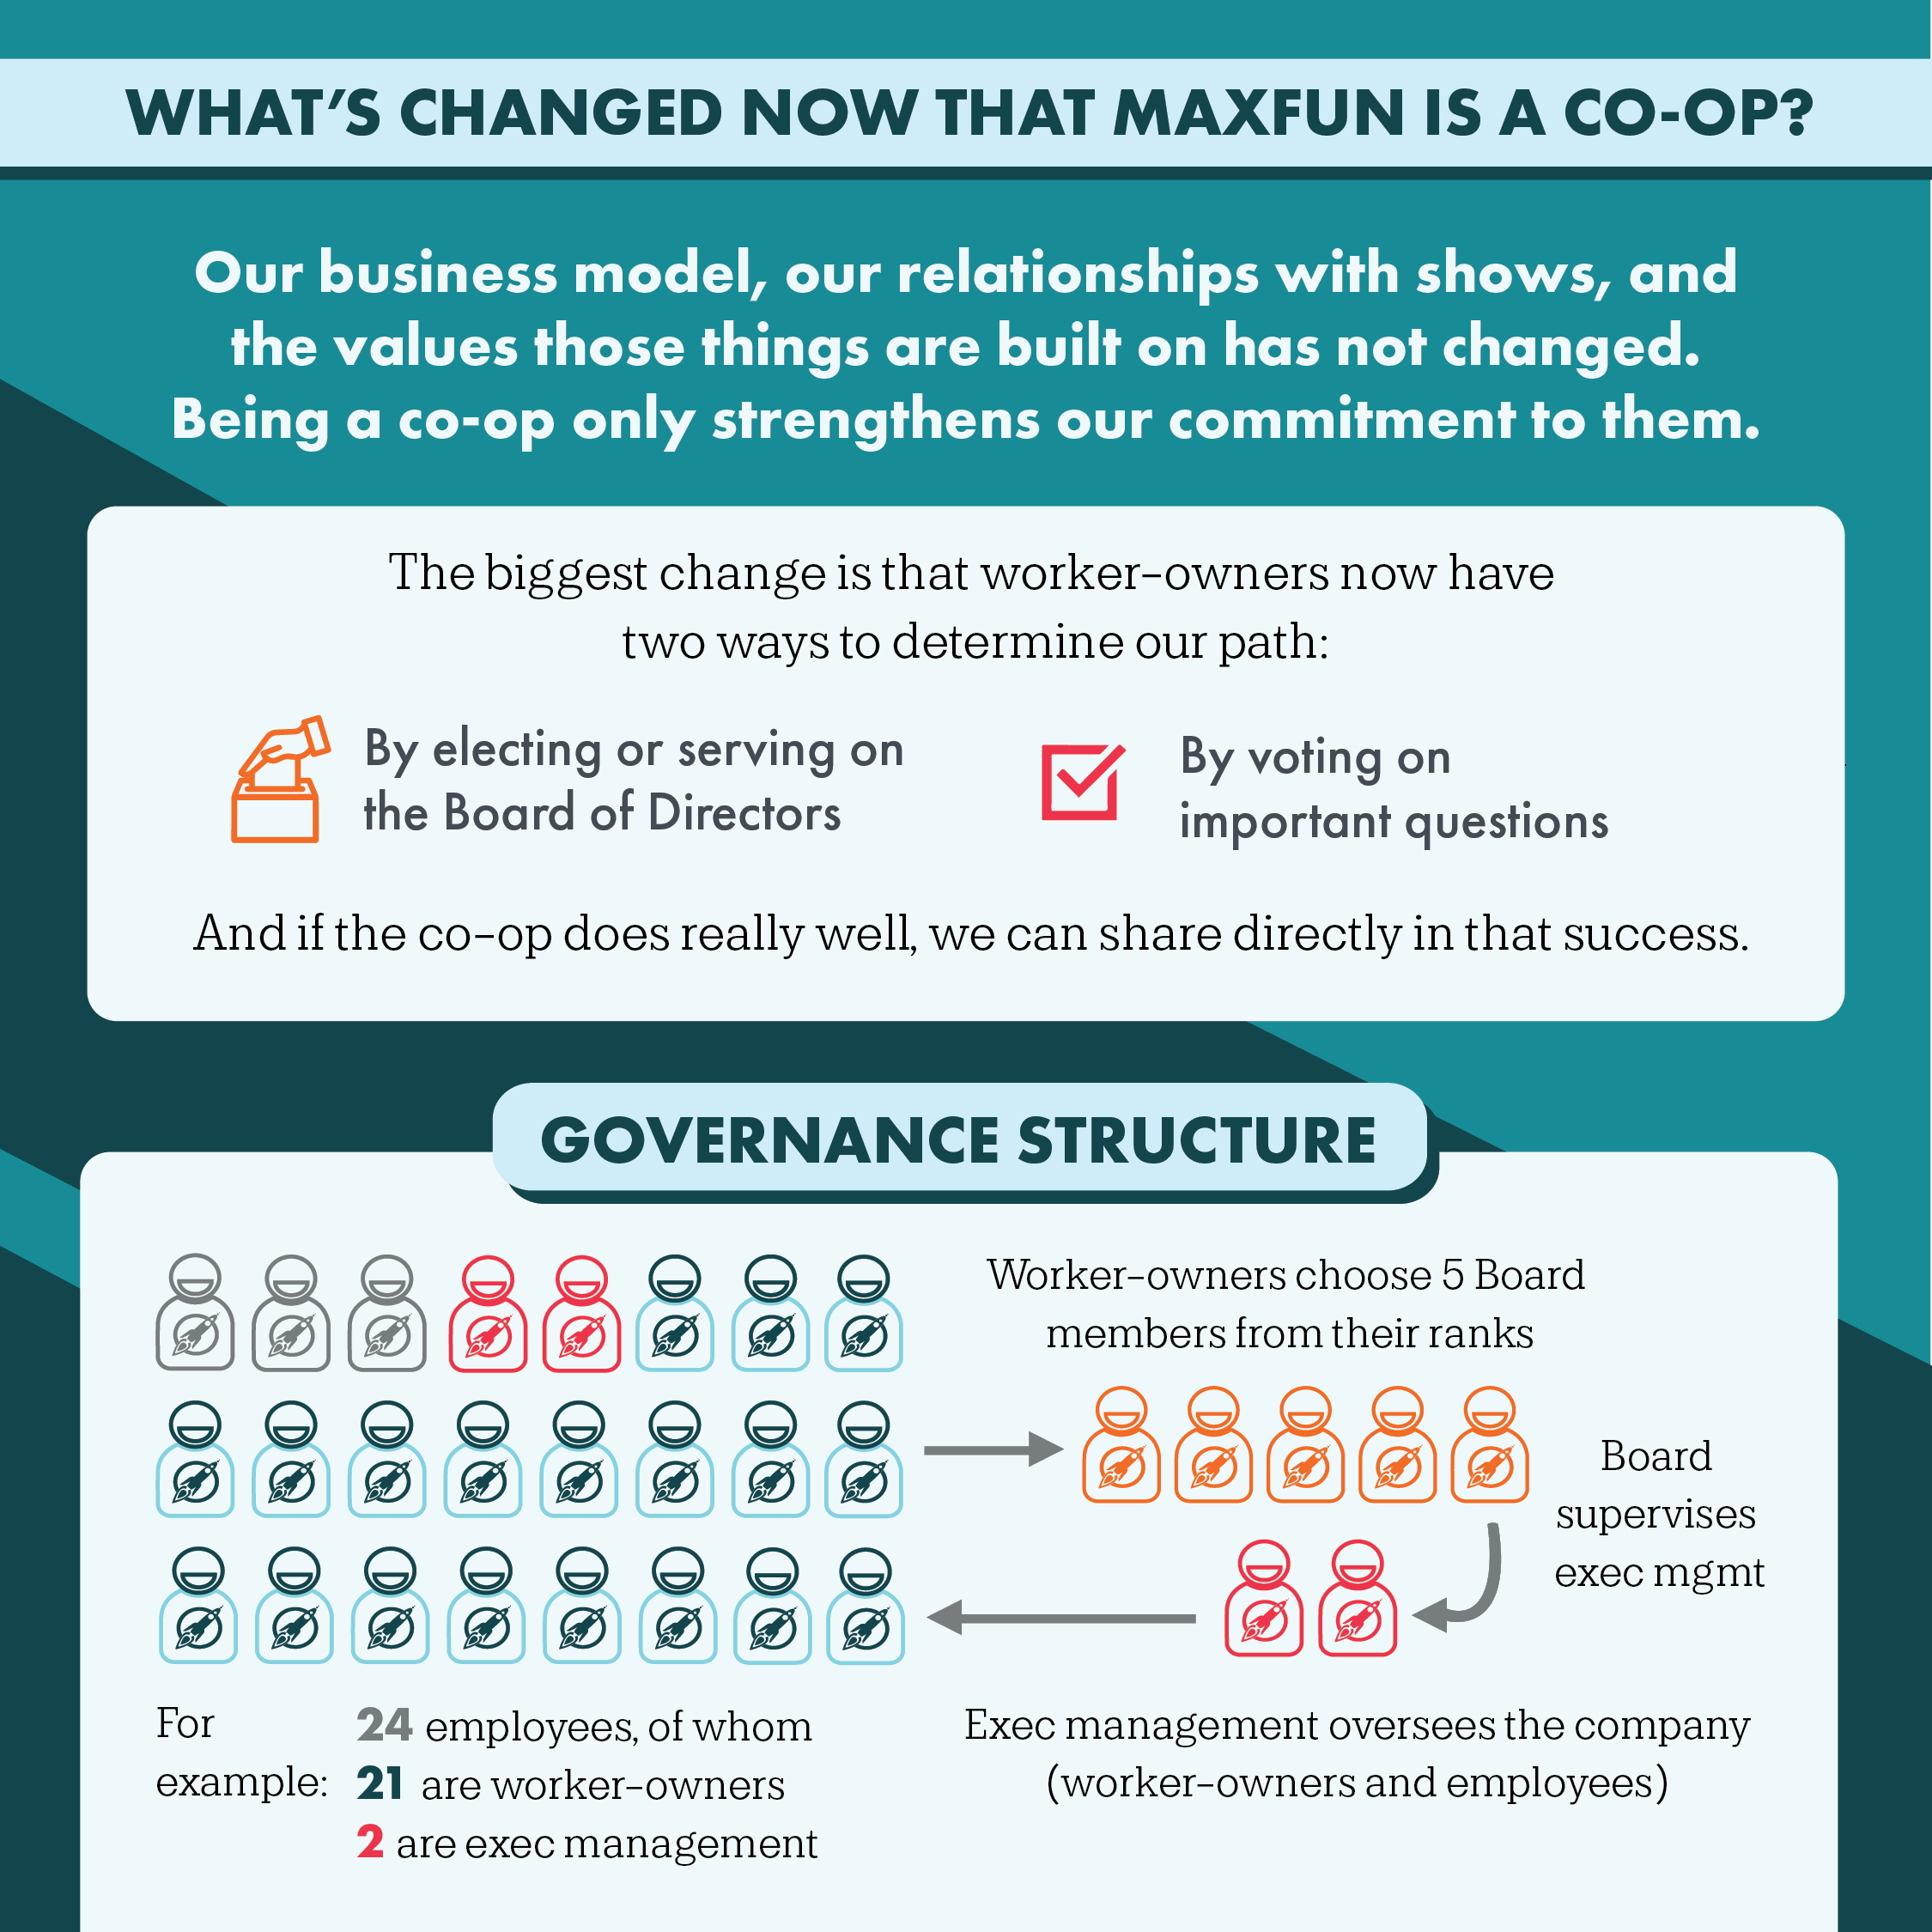 Heading: What's changed now that MaxFun is a co-op? Text: Our business model, our relationship with shows, and the values those things are built on have not changed. Being a co-op only strengthens our commitment to them. The biggest change is that worker-owners have two ways to determine our path: By electing or serving on the Board of Directors, By voting on important questions. And if the co-op does really well, we can share directly in that success. Subheading: Governance structure. Icons 24 icons of people wearing rocket shirts, 3 are grey, 2 are red, the rest are blue. Text underneath: For examples: 24 employees, of whom, 21 are worker-owners, 2 are exec management. An arrow points from that group to 5 orange people, above is the text: worker-owners choose 5 Board members from their ranks. An arrow points from that group to two red people icons and text reads: Board supervises executive management. Under the two red people icons is text: exec management oversees the company (worker-owners and employees).